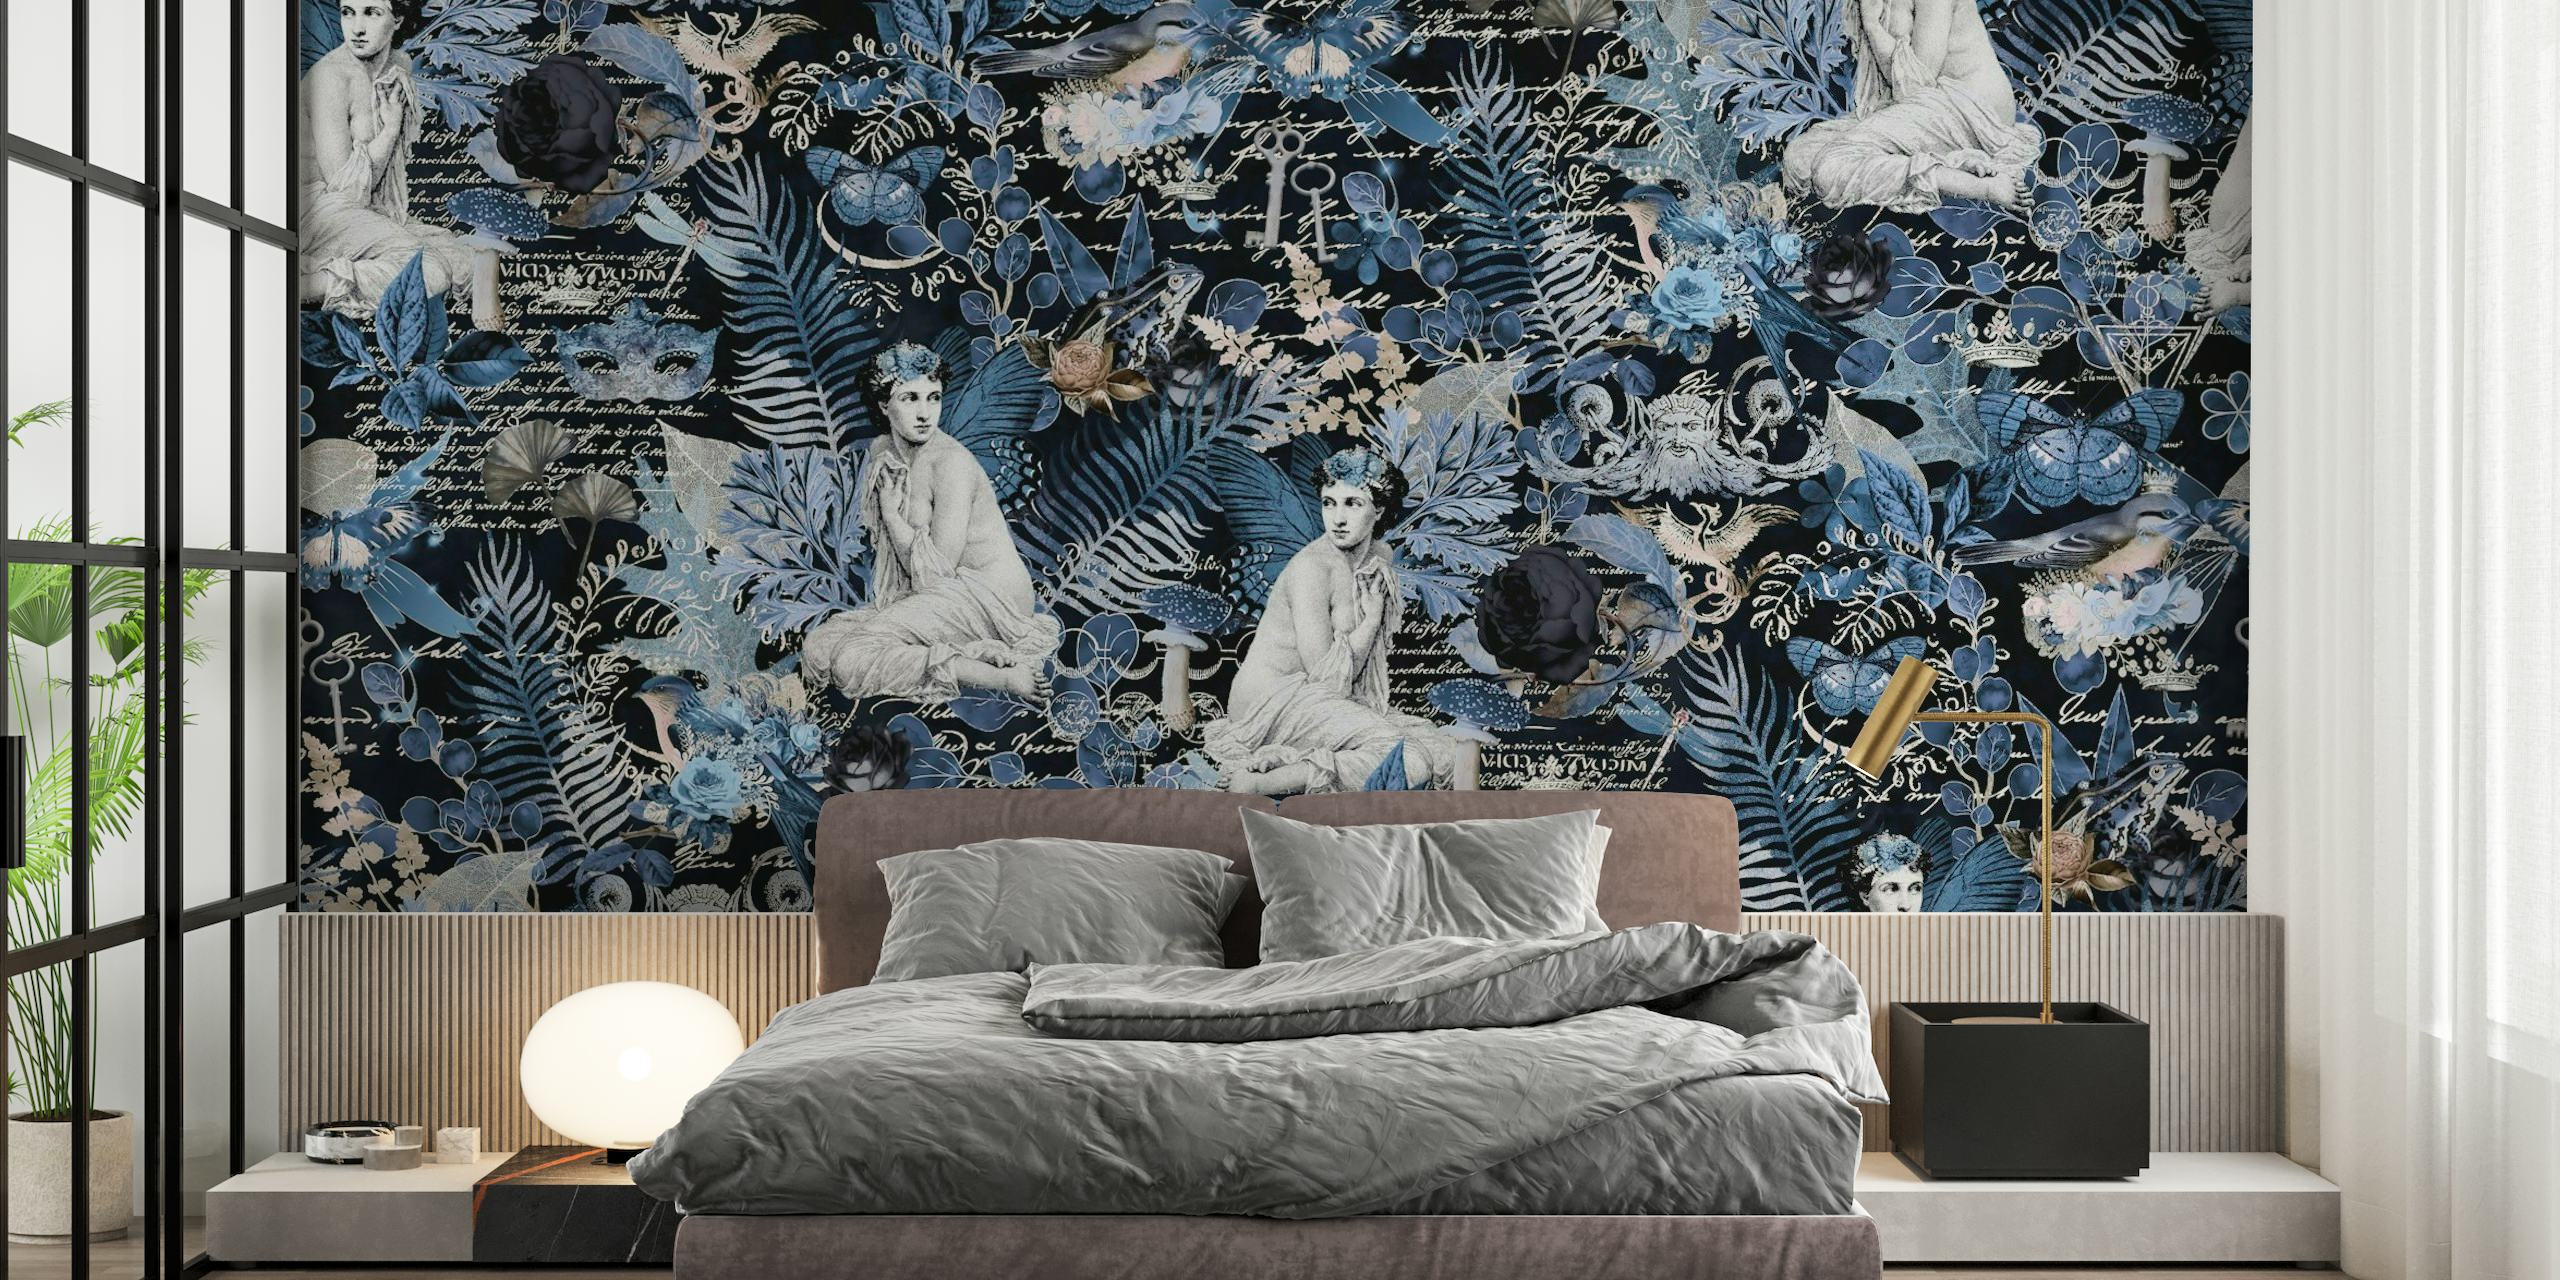 Mystic Mythology Forest Blue wall mural featuring enigmatic forest scenery with mythological figures in blue tones.